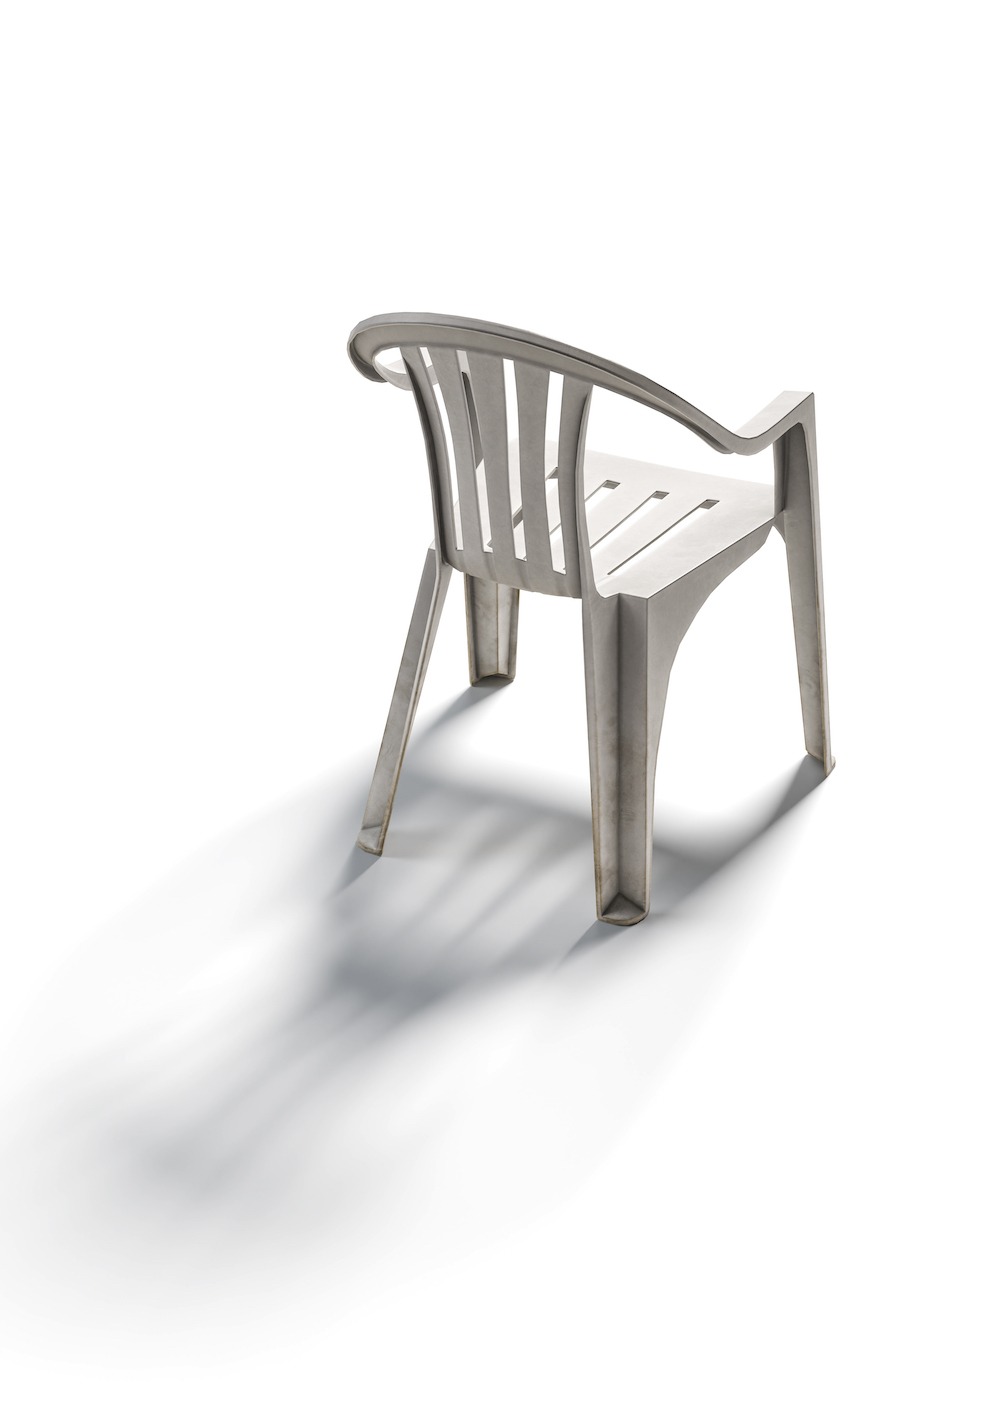 white monobloc plastic chairs isolated on white background. Clipping path included.